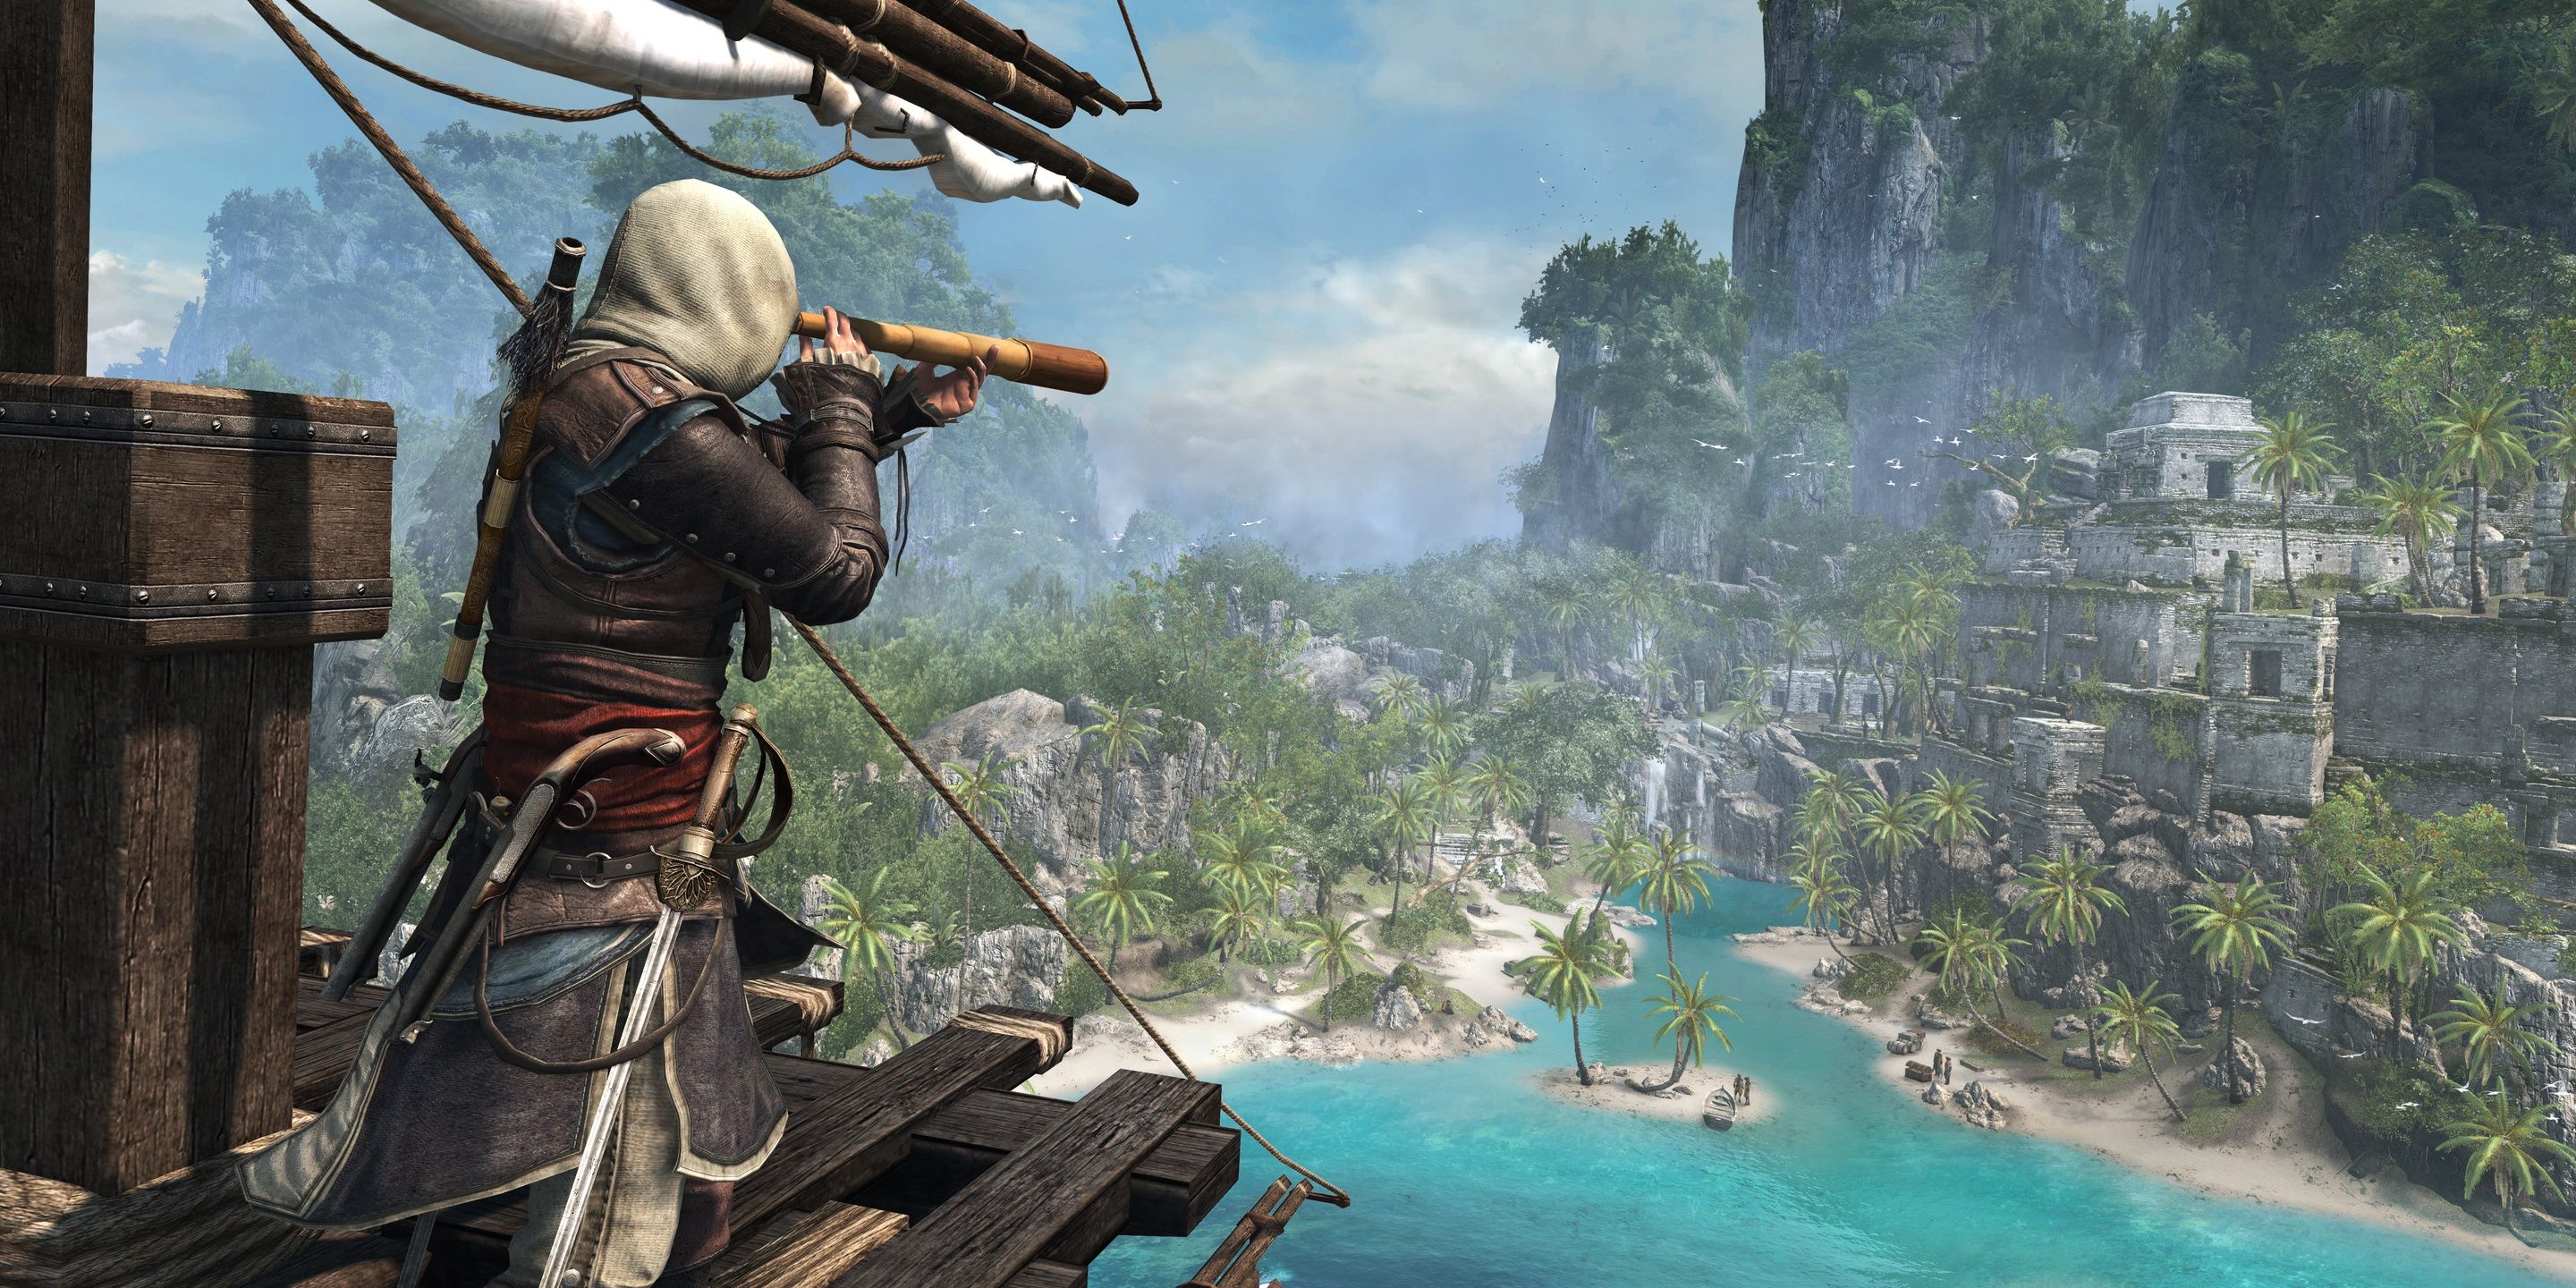 Edward Kenway looking through a mirror at an island from his ship at sea in Assassin's Creed IV Black Flag.